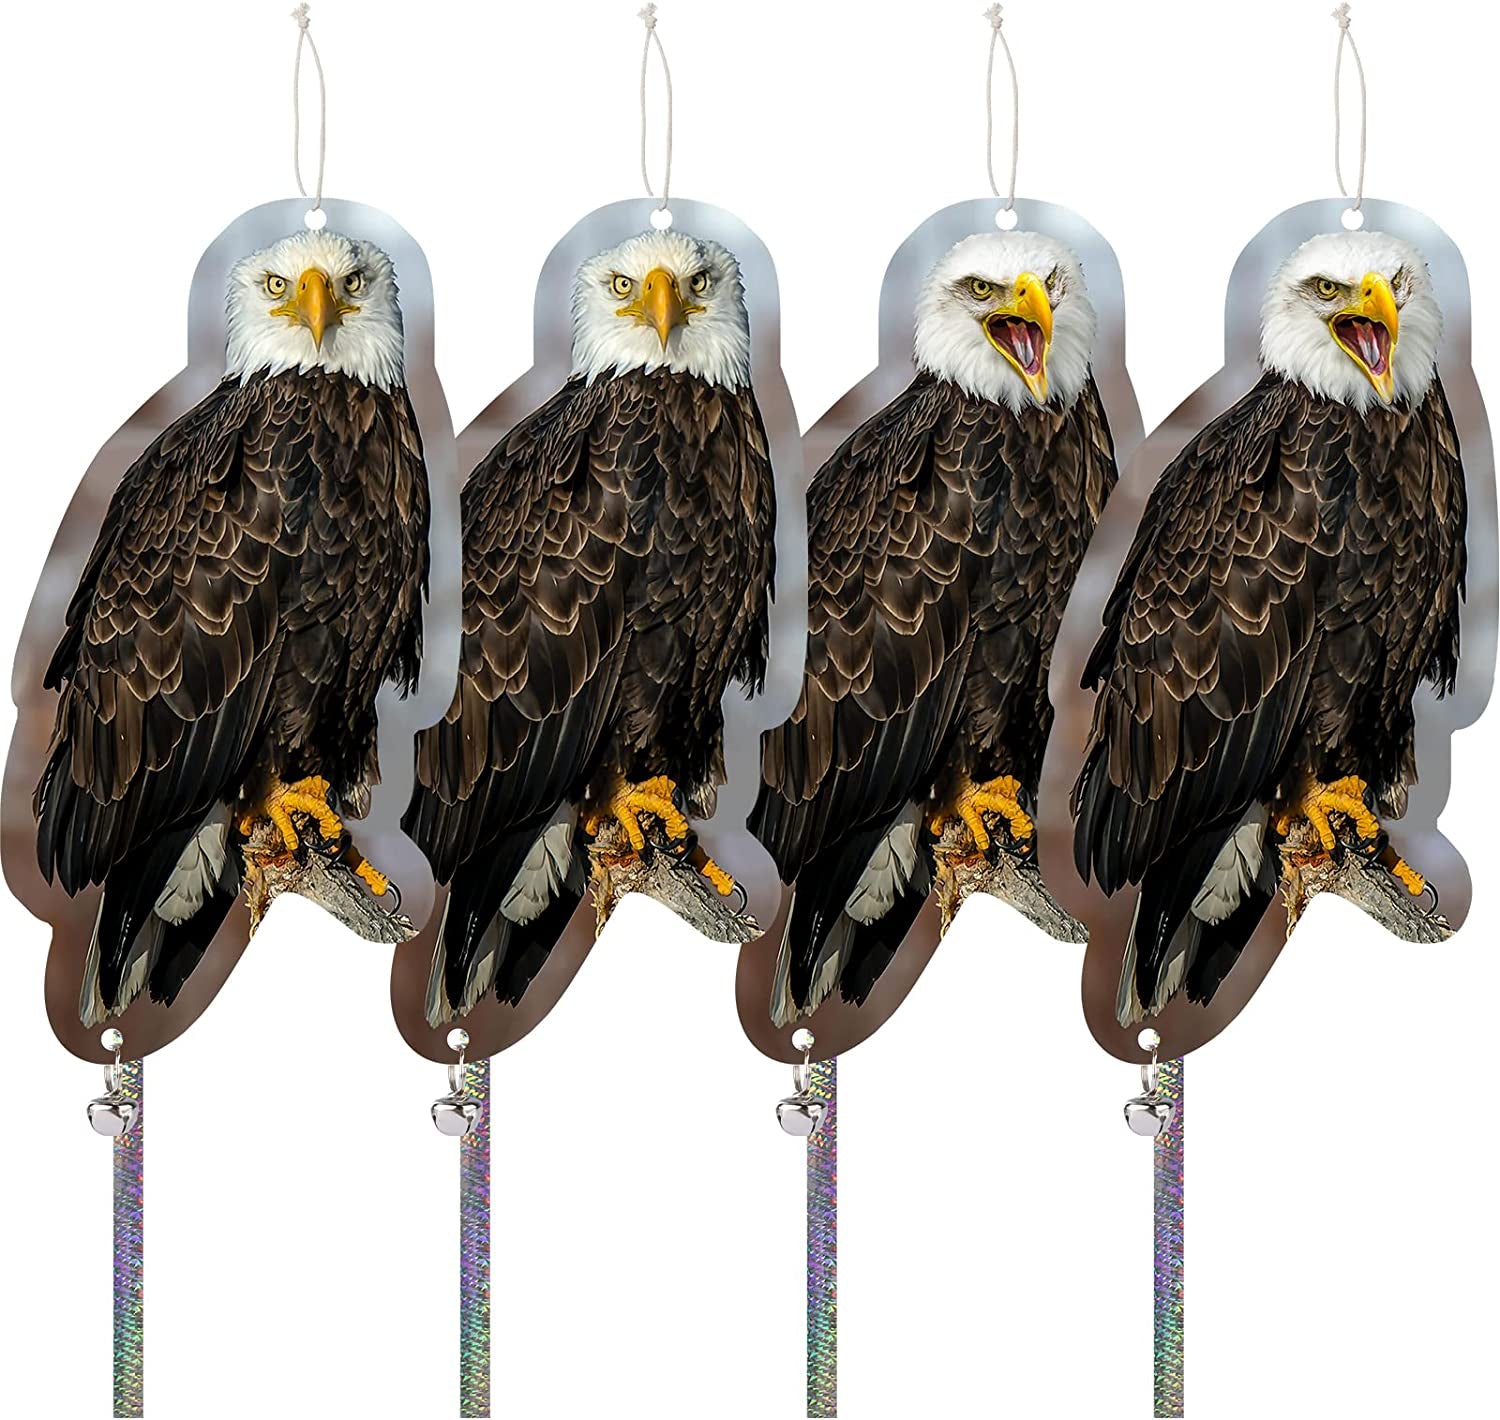 kungfu Mall, Kungfu Mall Bird Scare Devices to Scare Birds Away, Garden Reflectors, Garden Hawks to Keep Birds Away, Hanging Fake Hawk Prevent Bird Pooping Scare Woodpeckers Pigeon Rabbit Squirrel Away-4Pcs